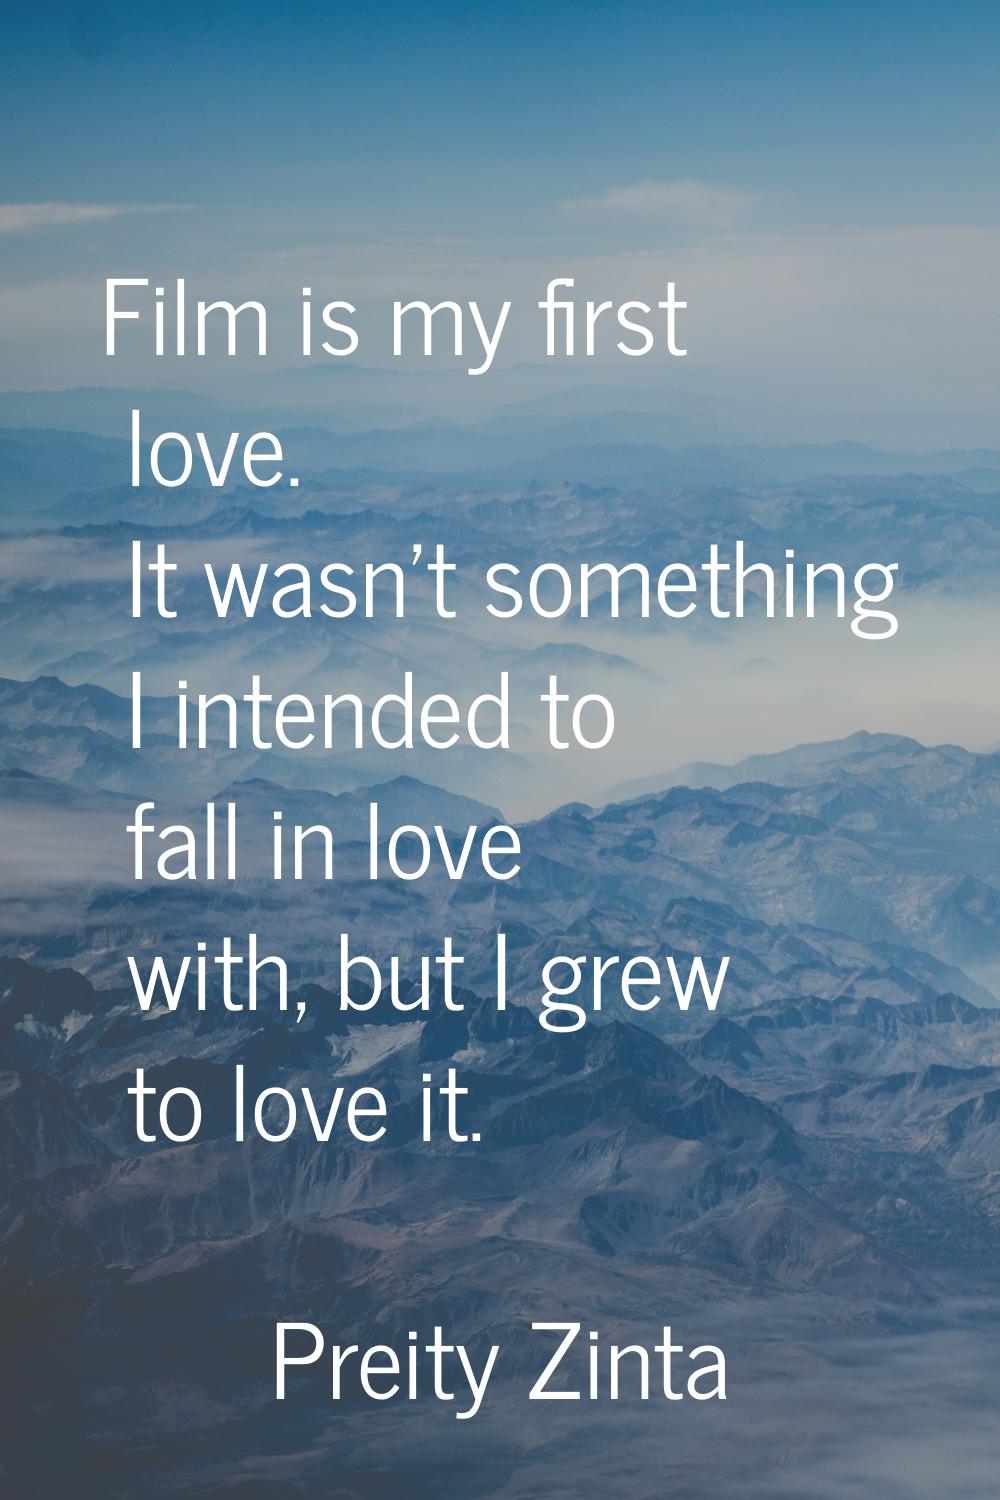 Film is my first love. It wasn't something I intended to fall in love with, but I grew to love it.